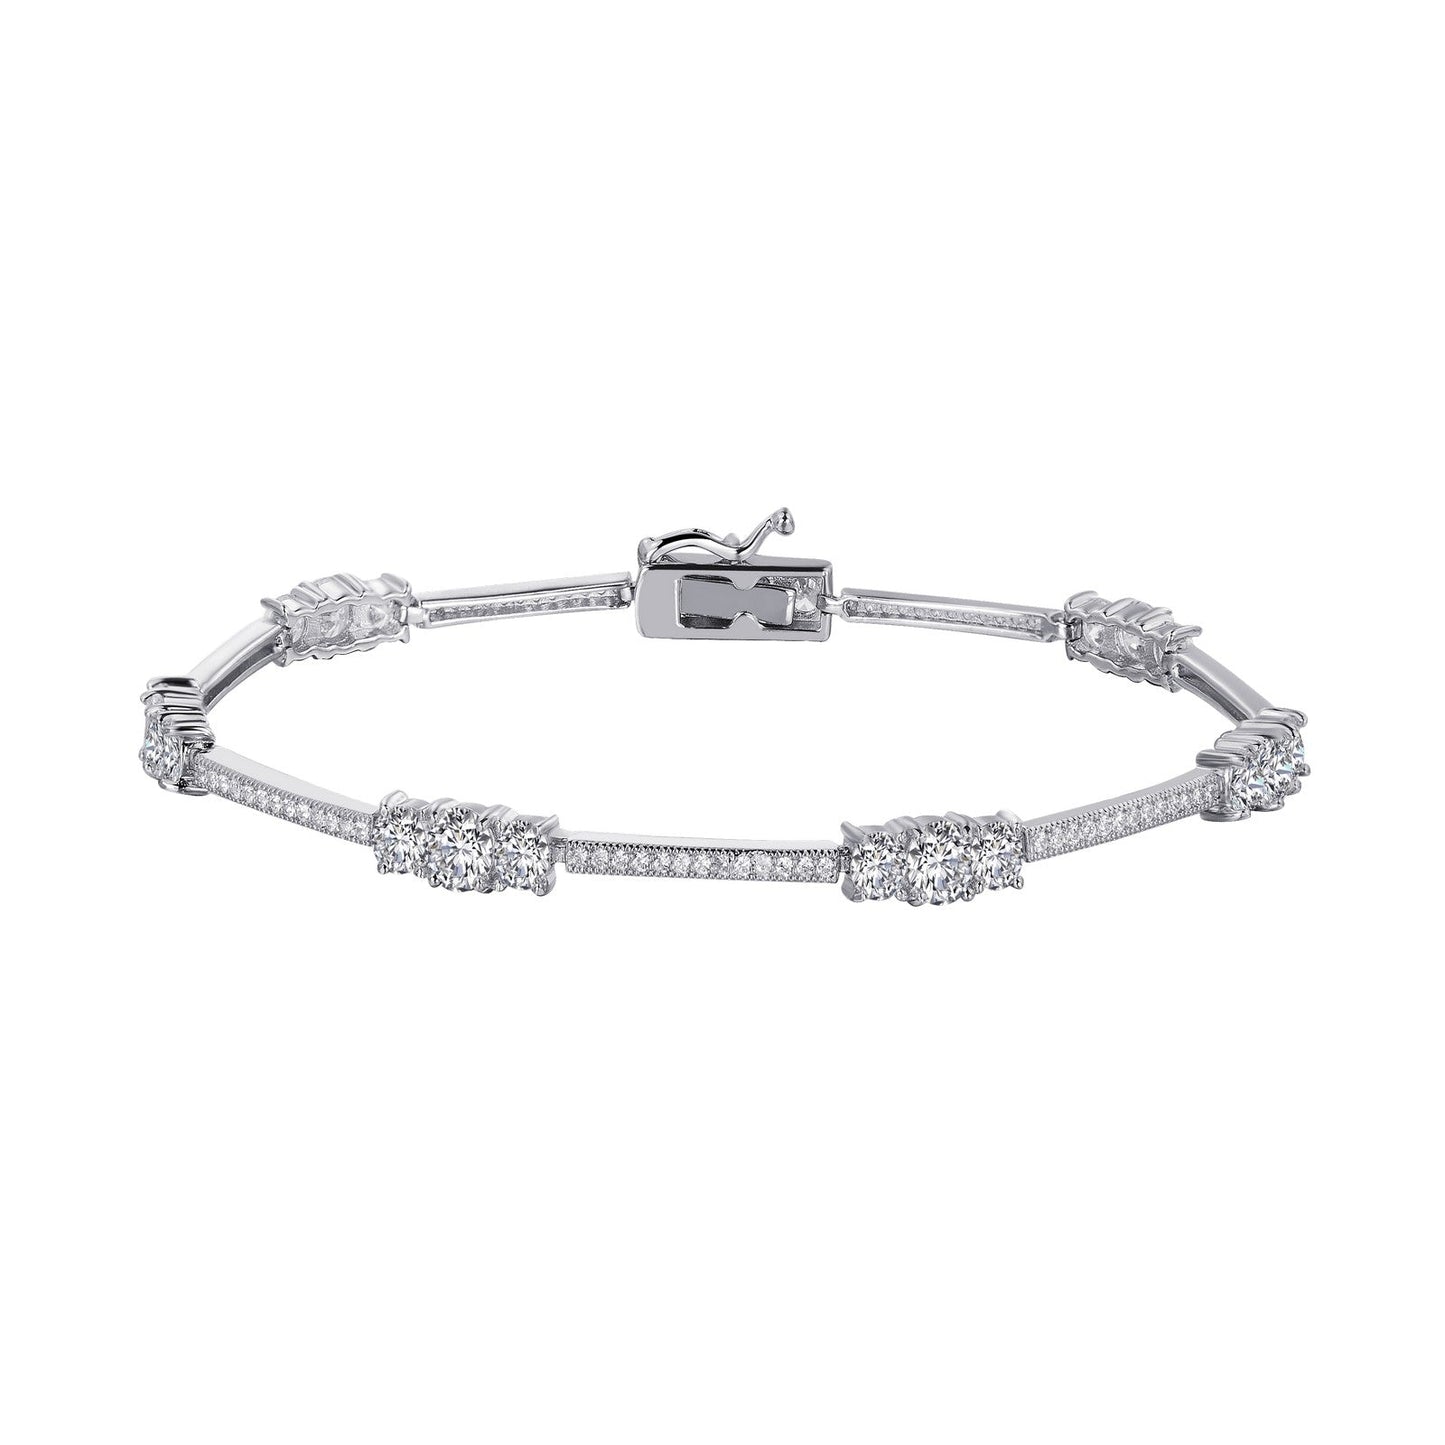 Load image into Gallery viewer, Lafonn Stylish Station Bracelet 128 Stone Count B0008CLP82
